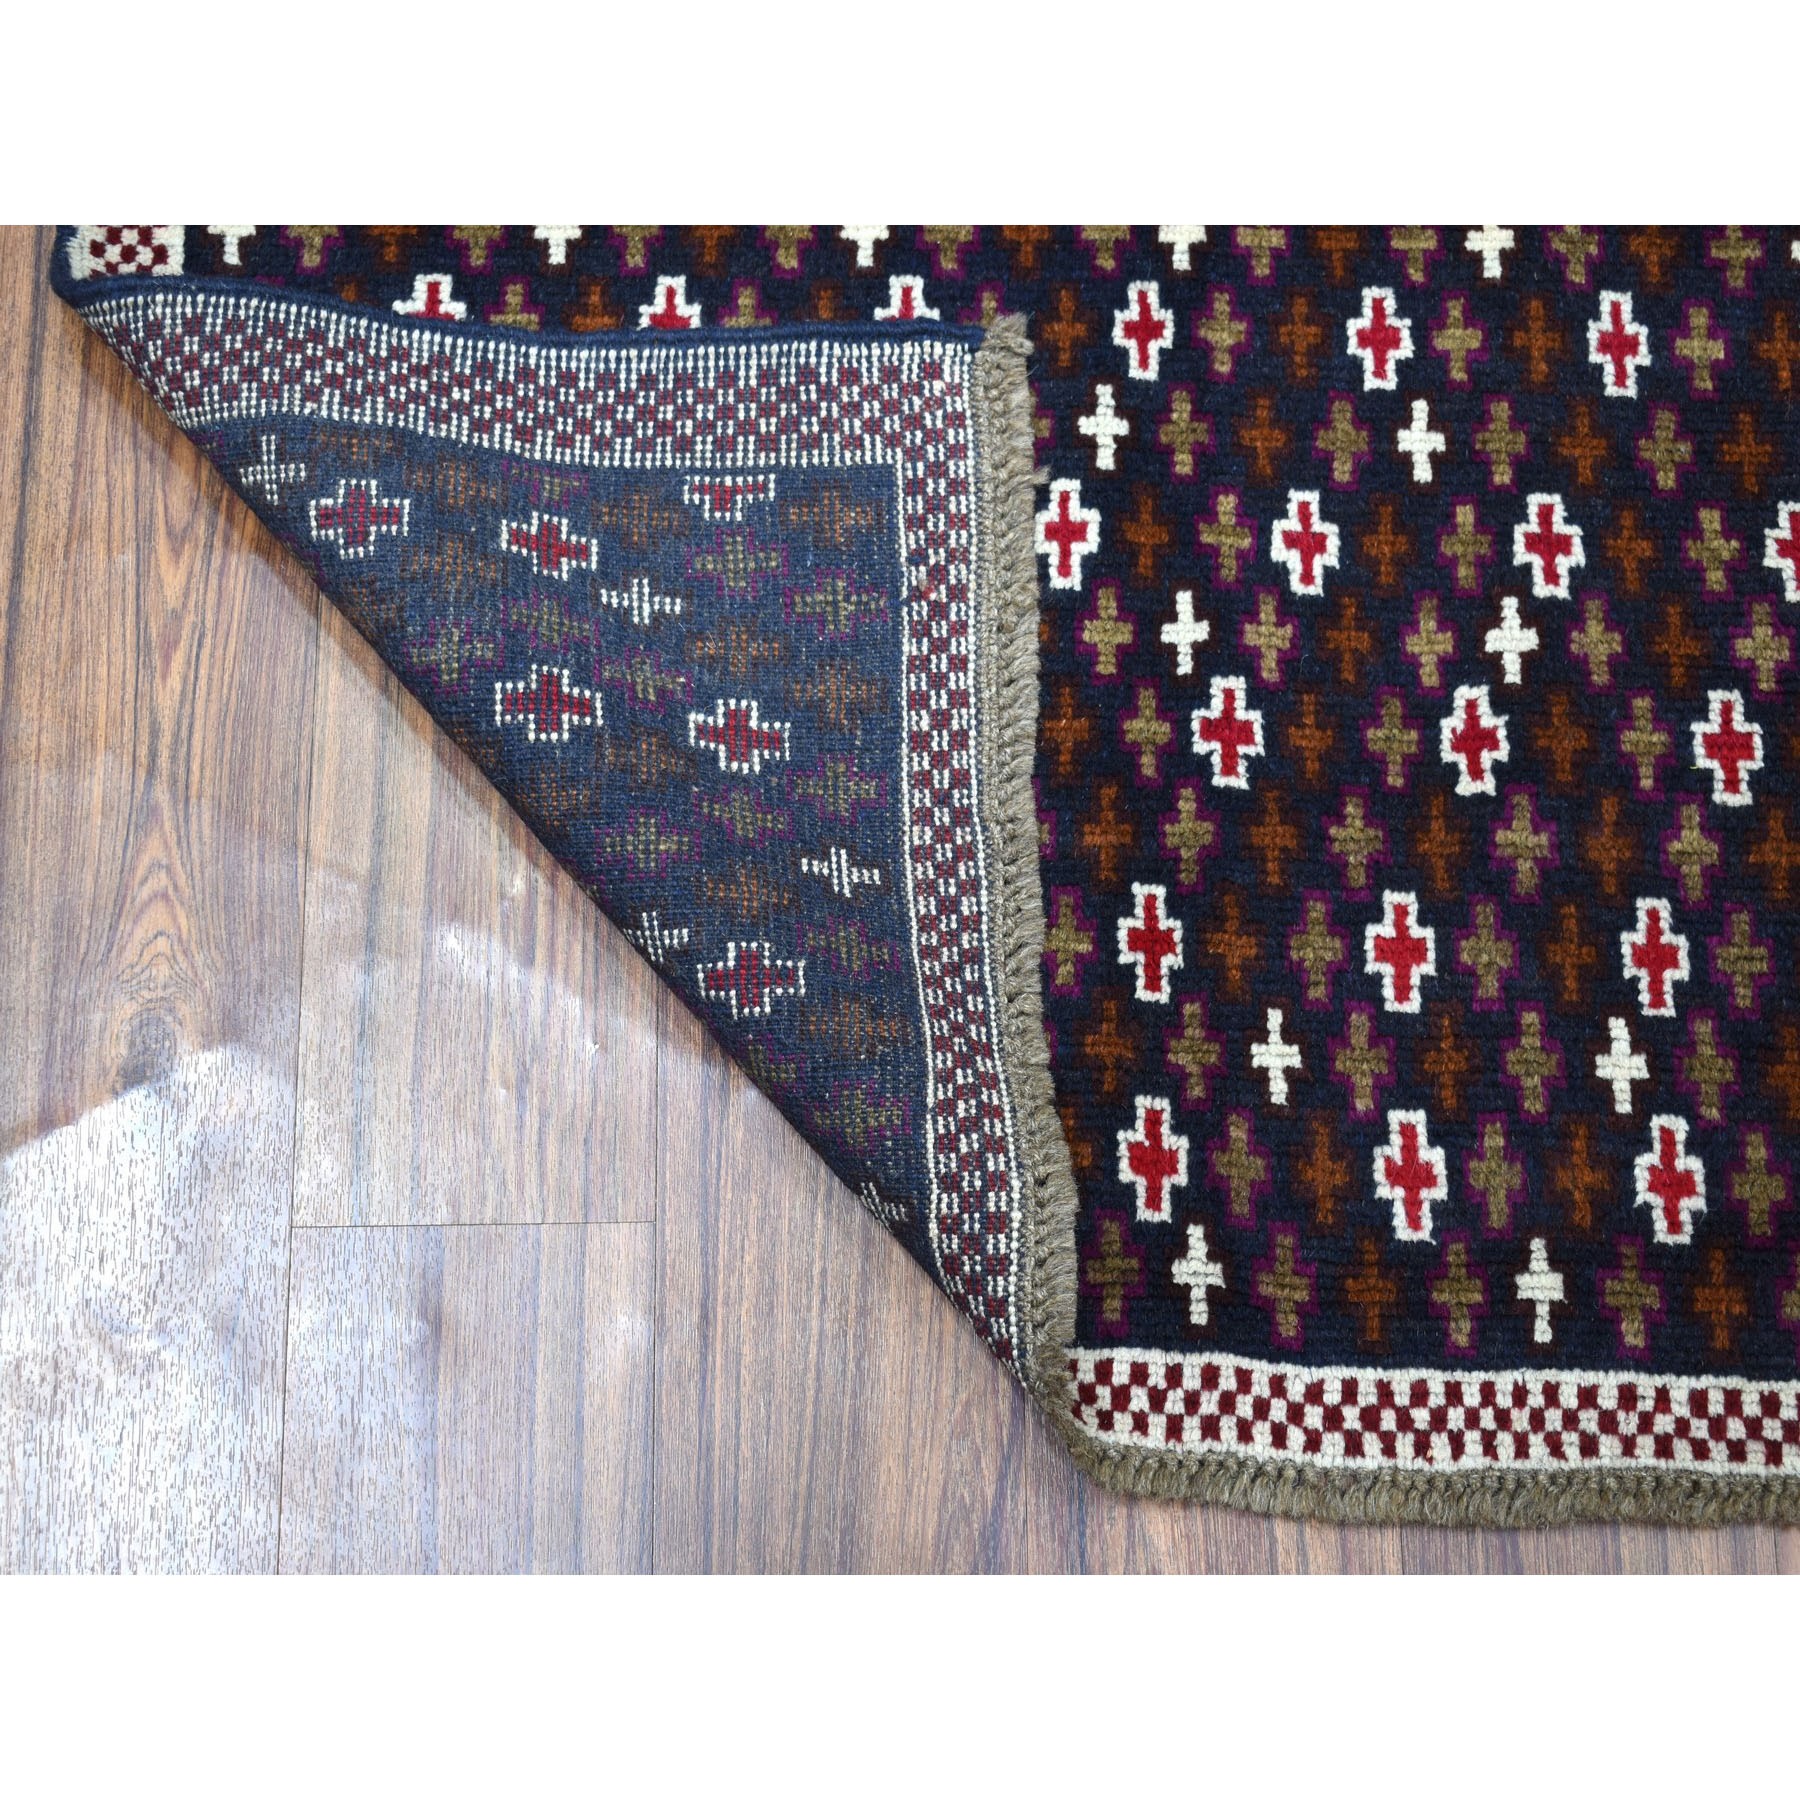 3'4"x4'6" Blue All Over Design Colorful Afghan Baluch Pure Wool Hand Woven Rug 